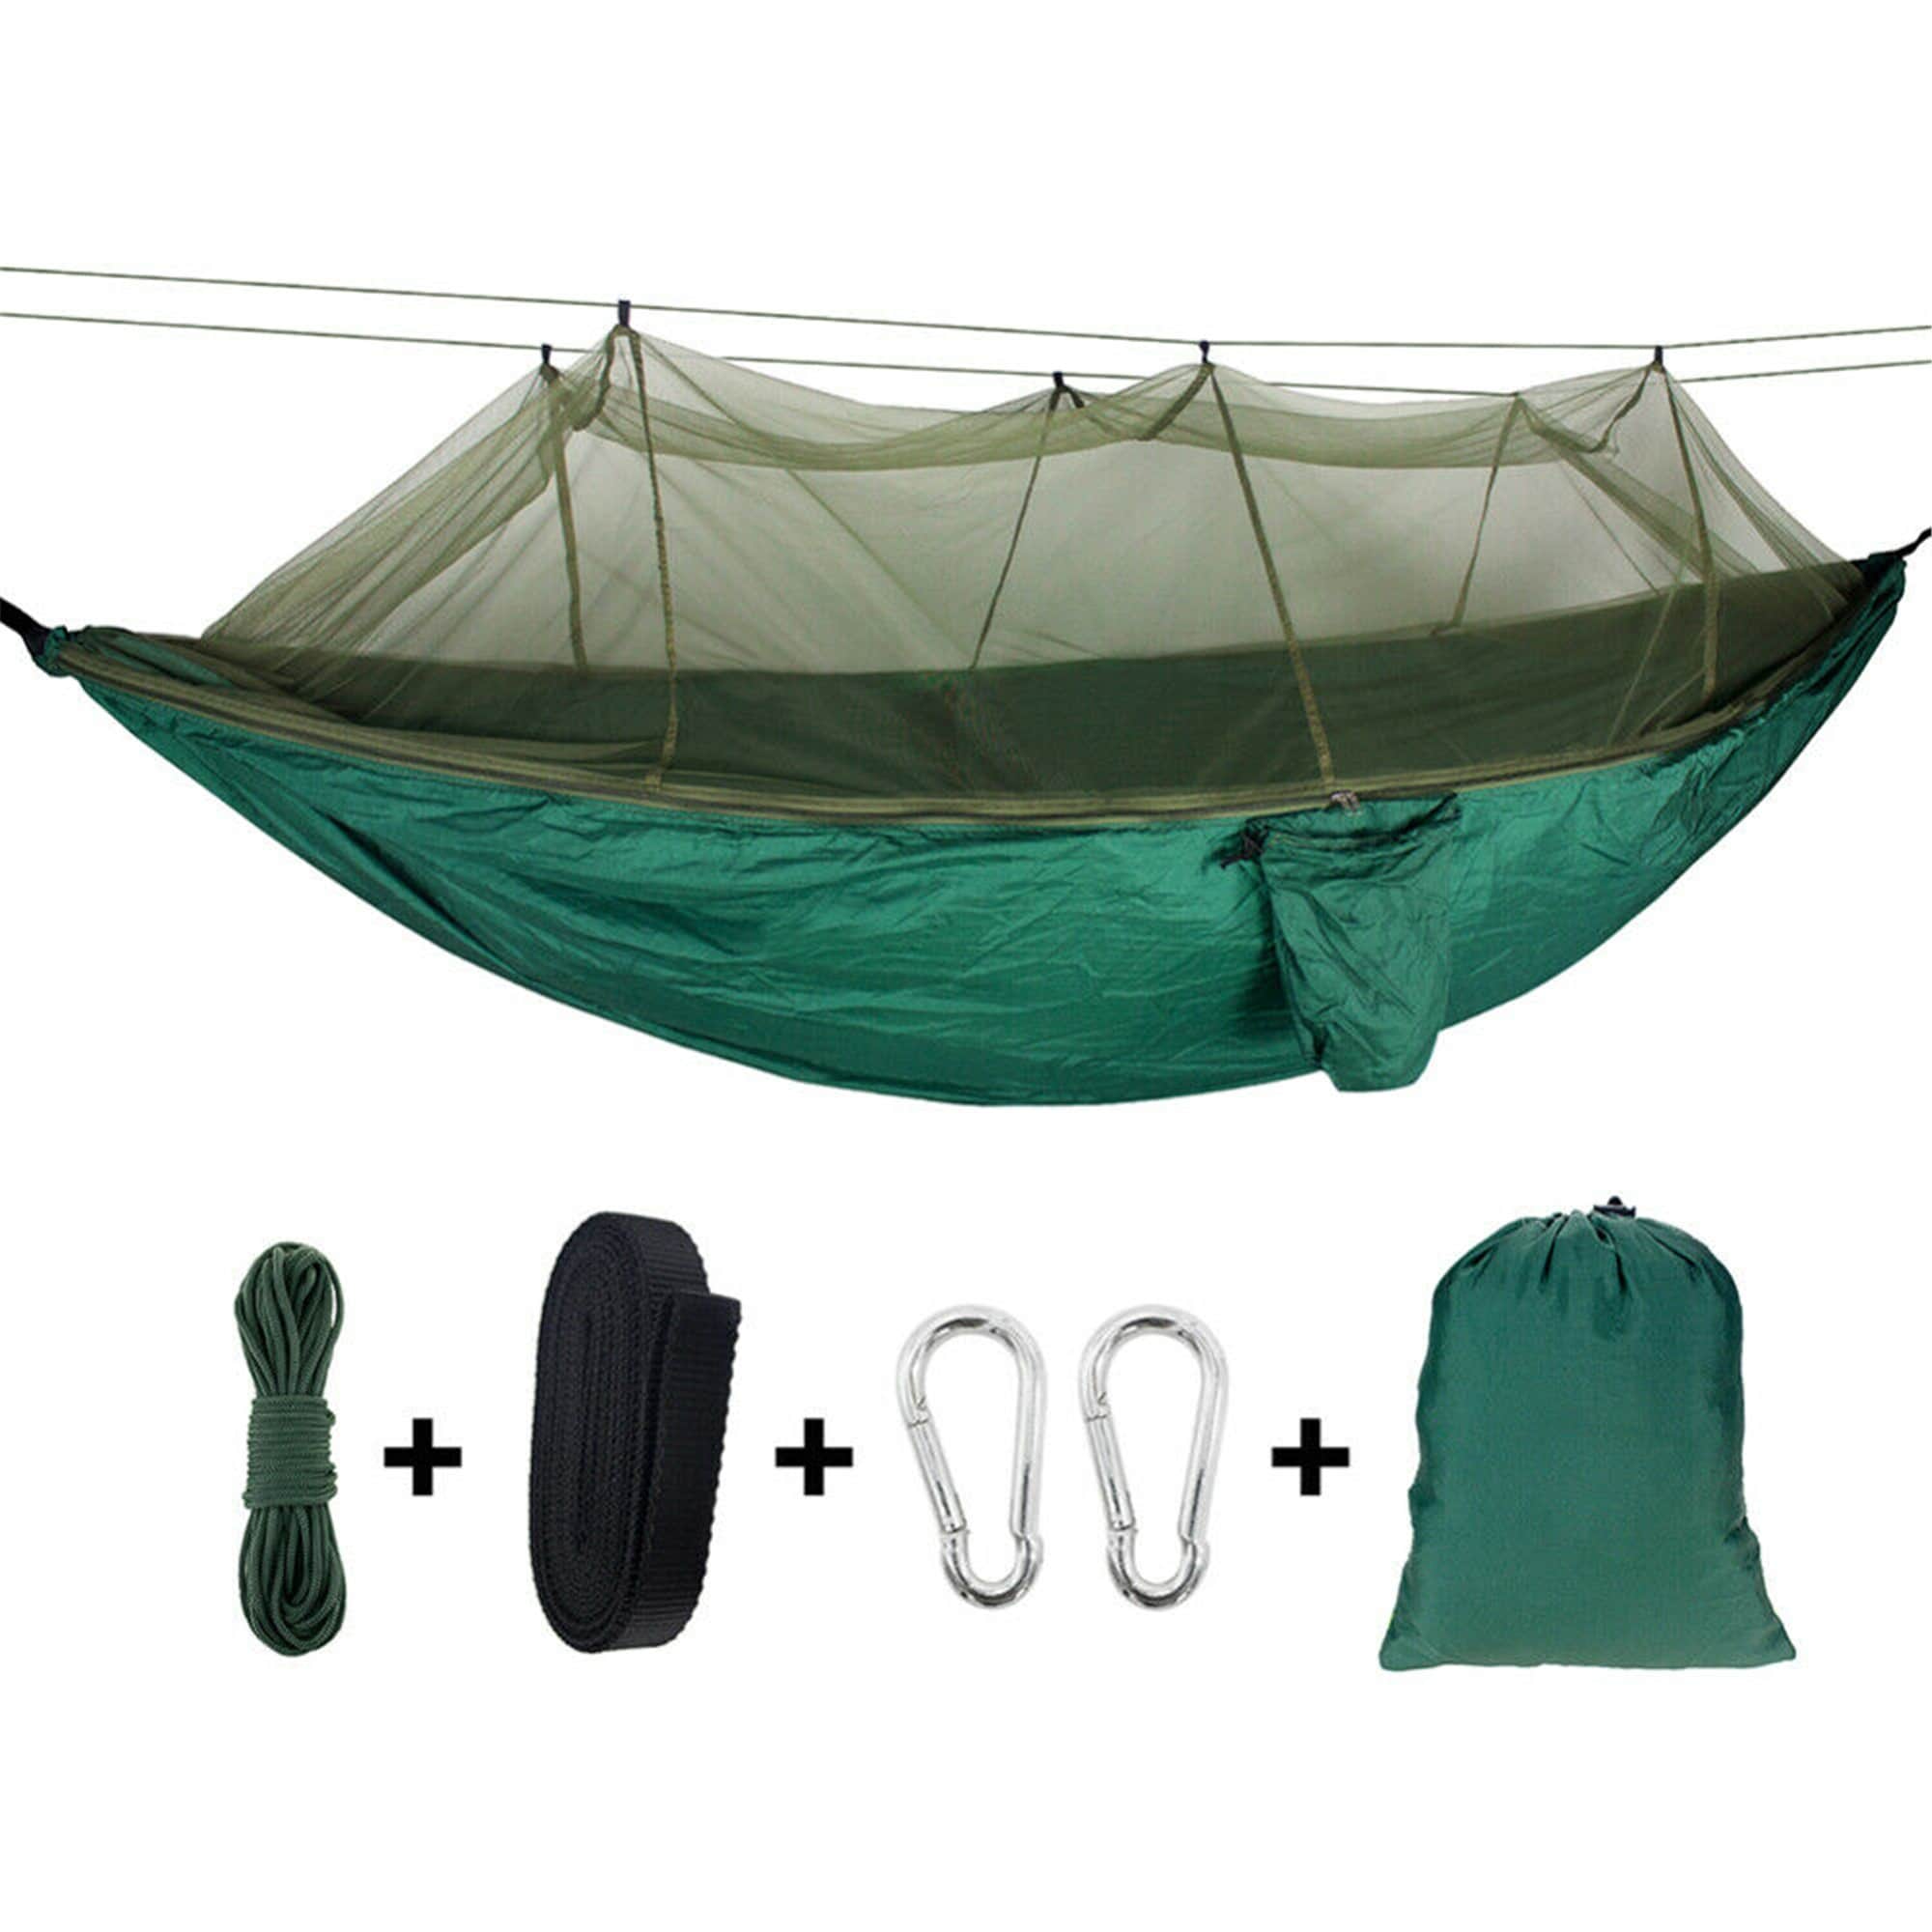 Outdoor Camping Hammock Double Person Travel Tent Hanging Bed With Mosquito Net 